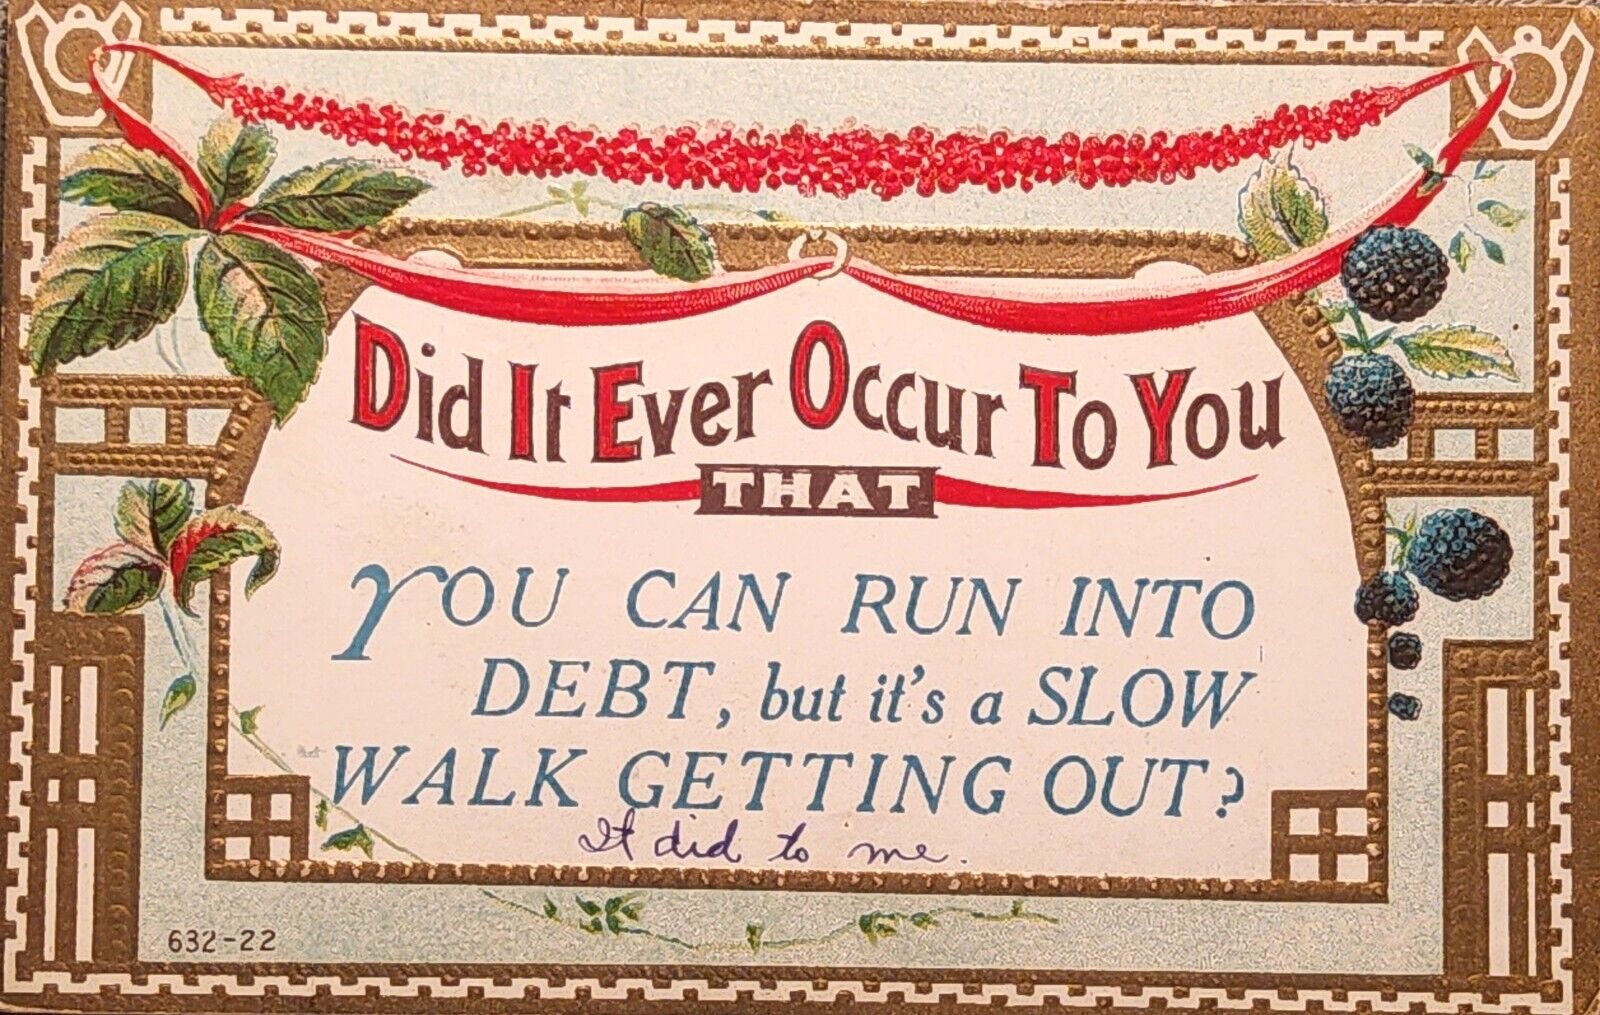 1912 Ouote Postcard ~ Did It Ever Occur To You ~ Running Into Debt ~ #-3510